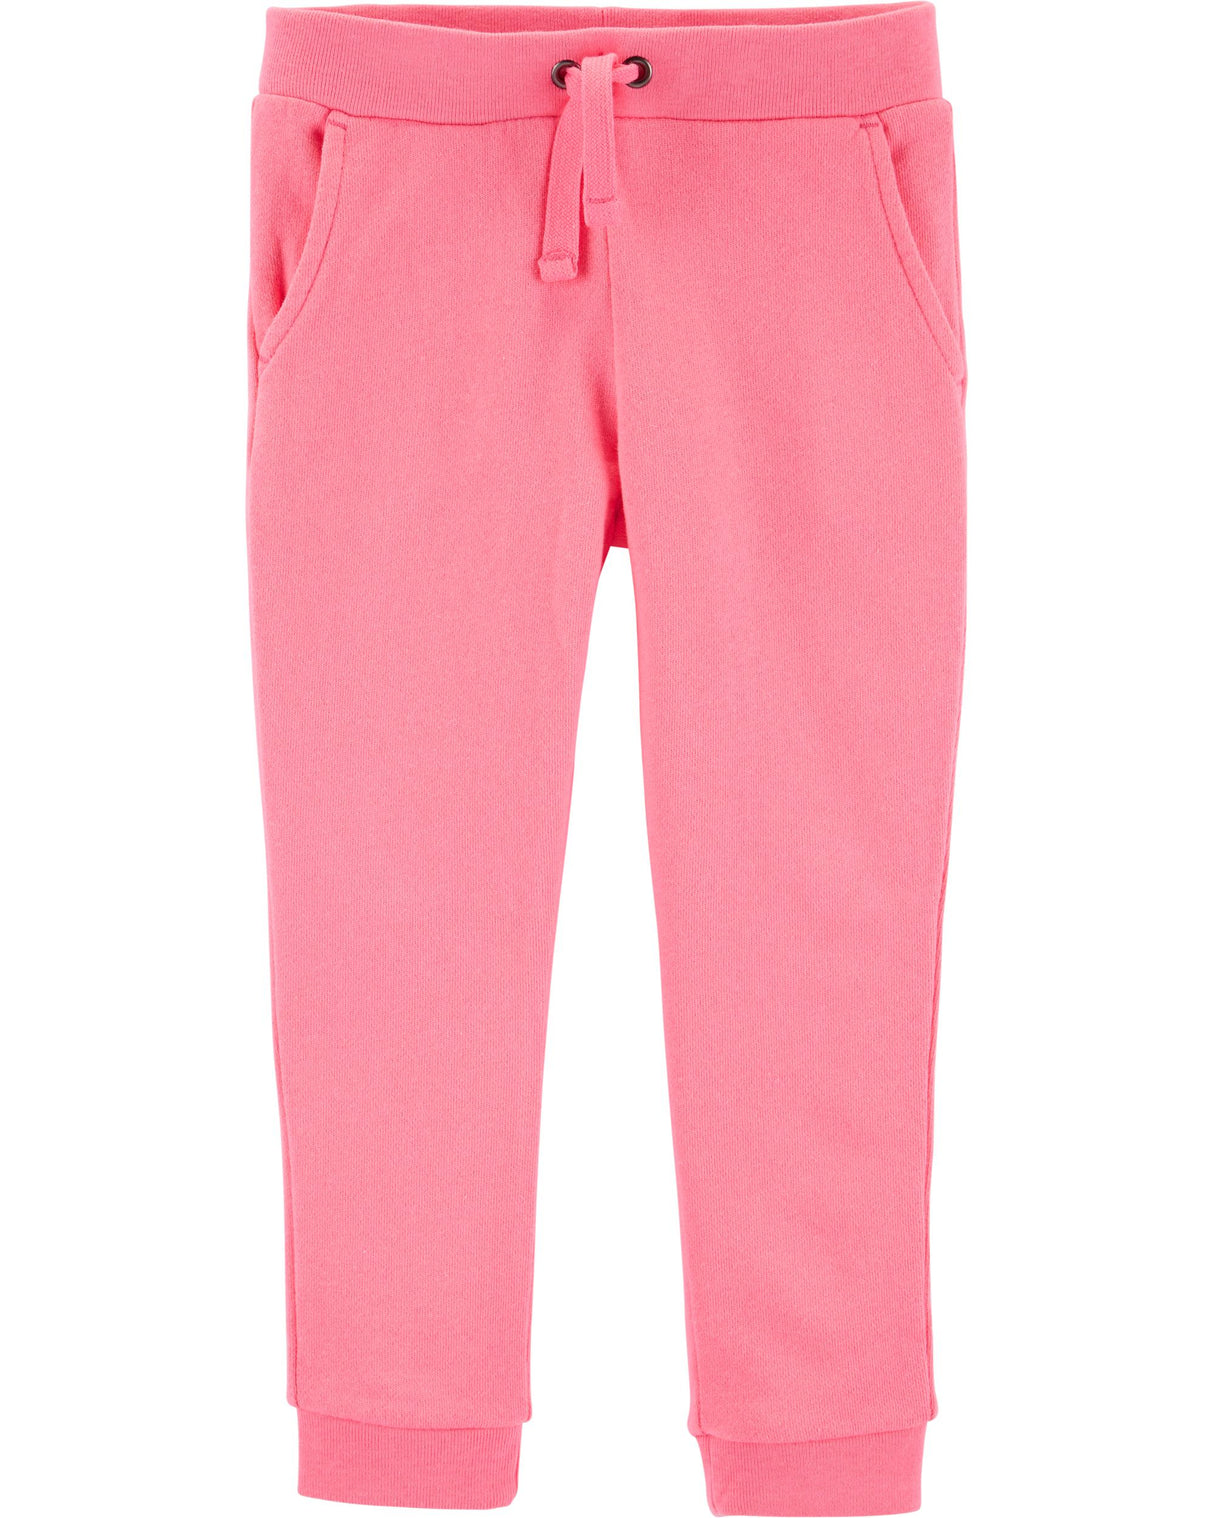 Carter's French Terry Jogger Pants - Dark Pink